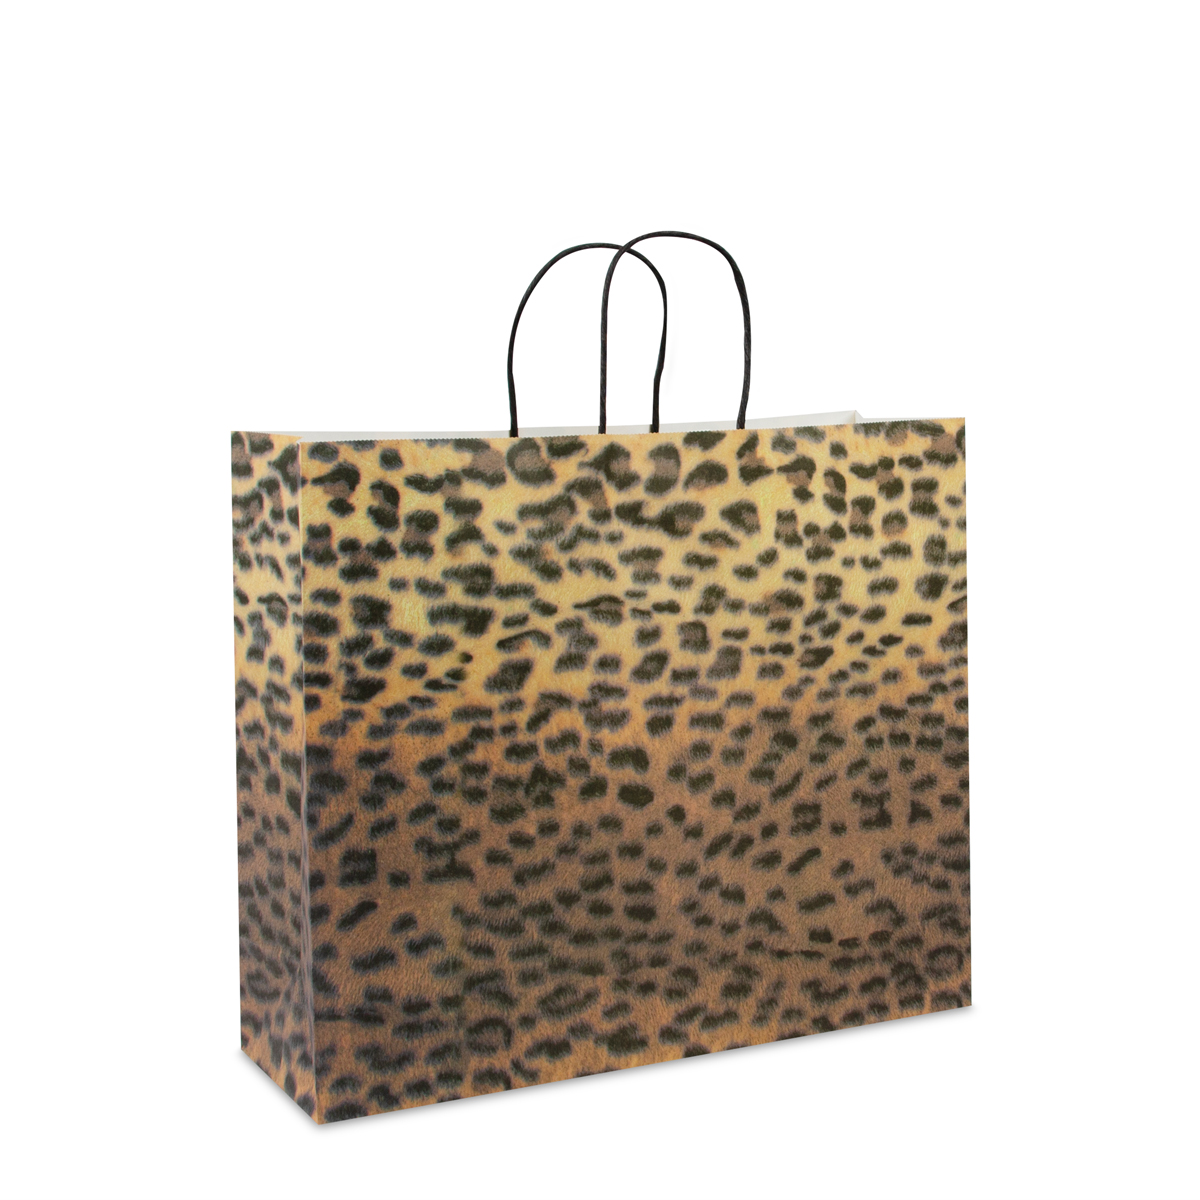 Twisted paper bags - Panther print 